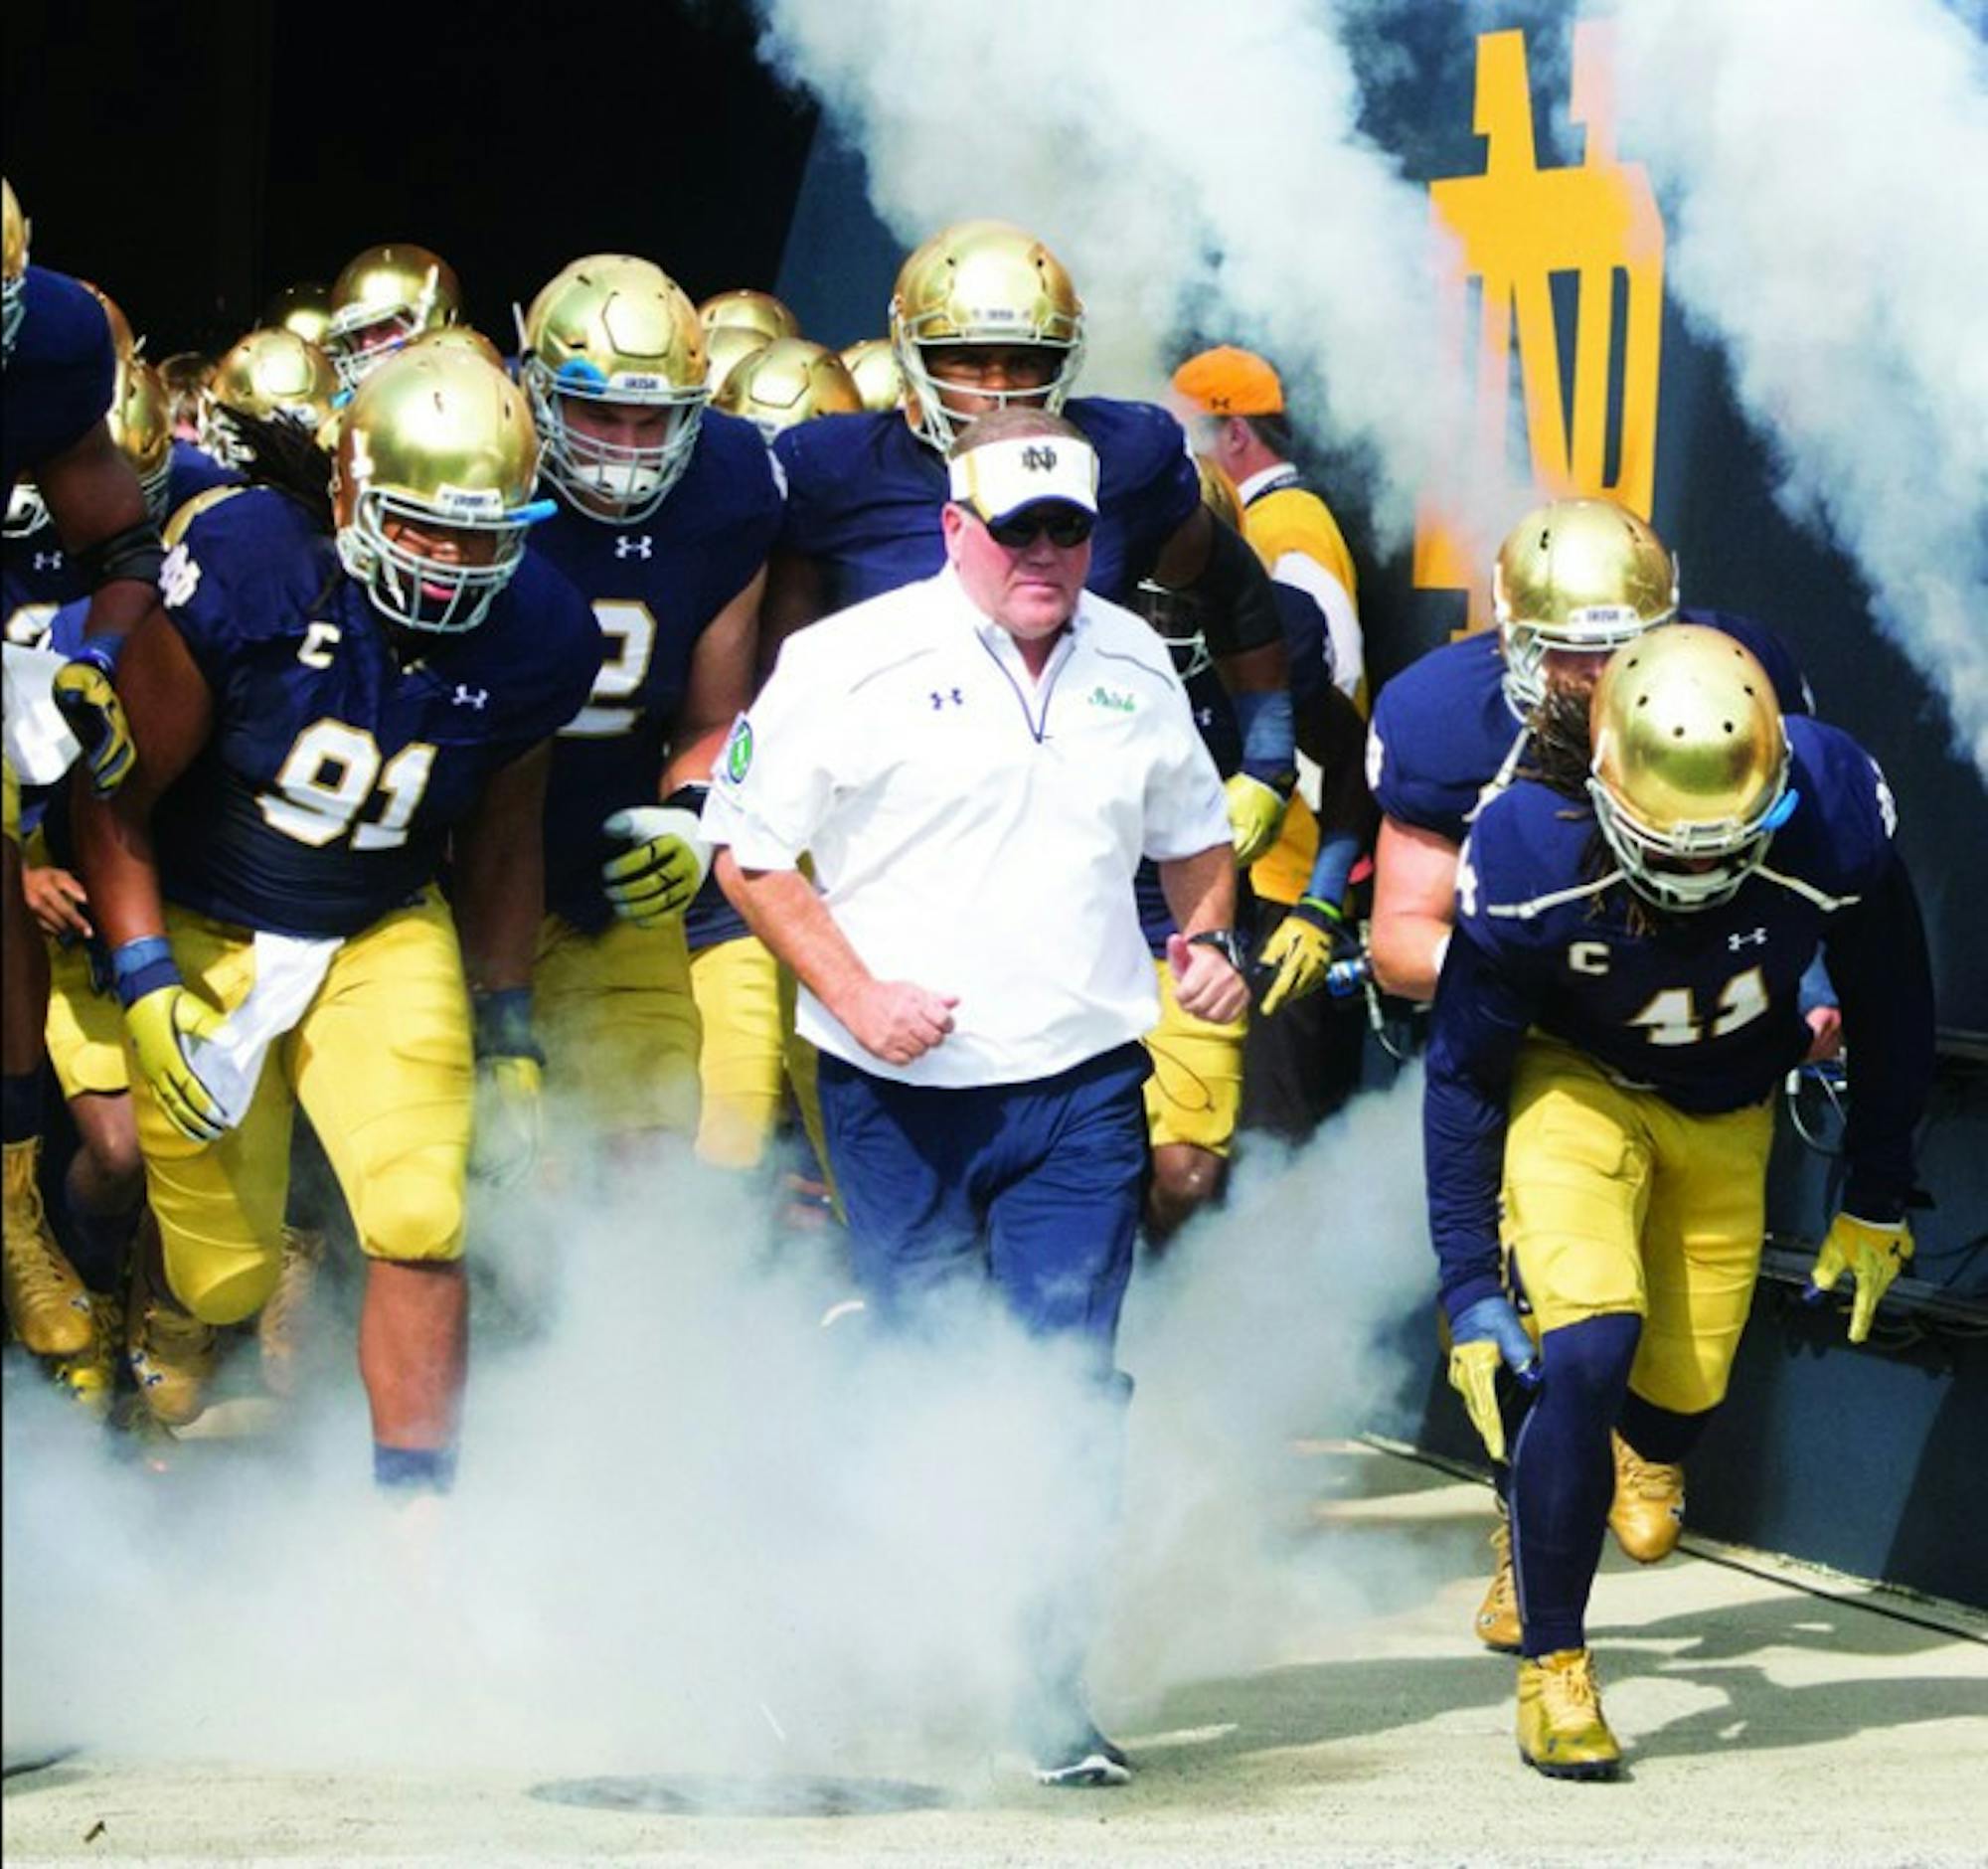 Irish head coach Brian Kelly leads his team onto the field before Notre Dame’s 62-27 win against Massachusetts on Sept. 26. Kelly is a perfect 5-0 so far in Shamrock Series games.